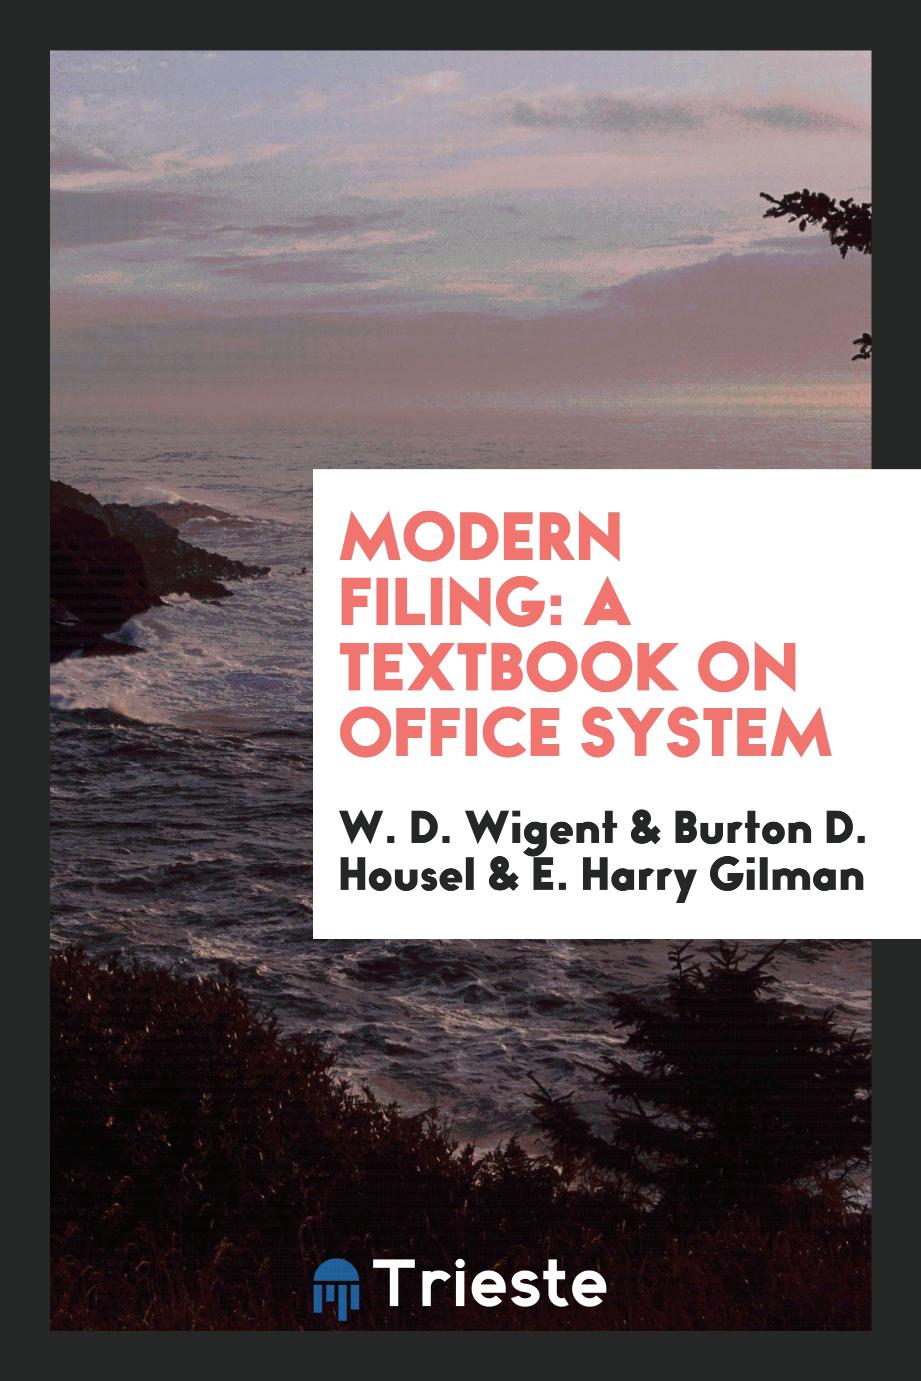 Modern Filing: A Textbook on Office System